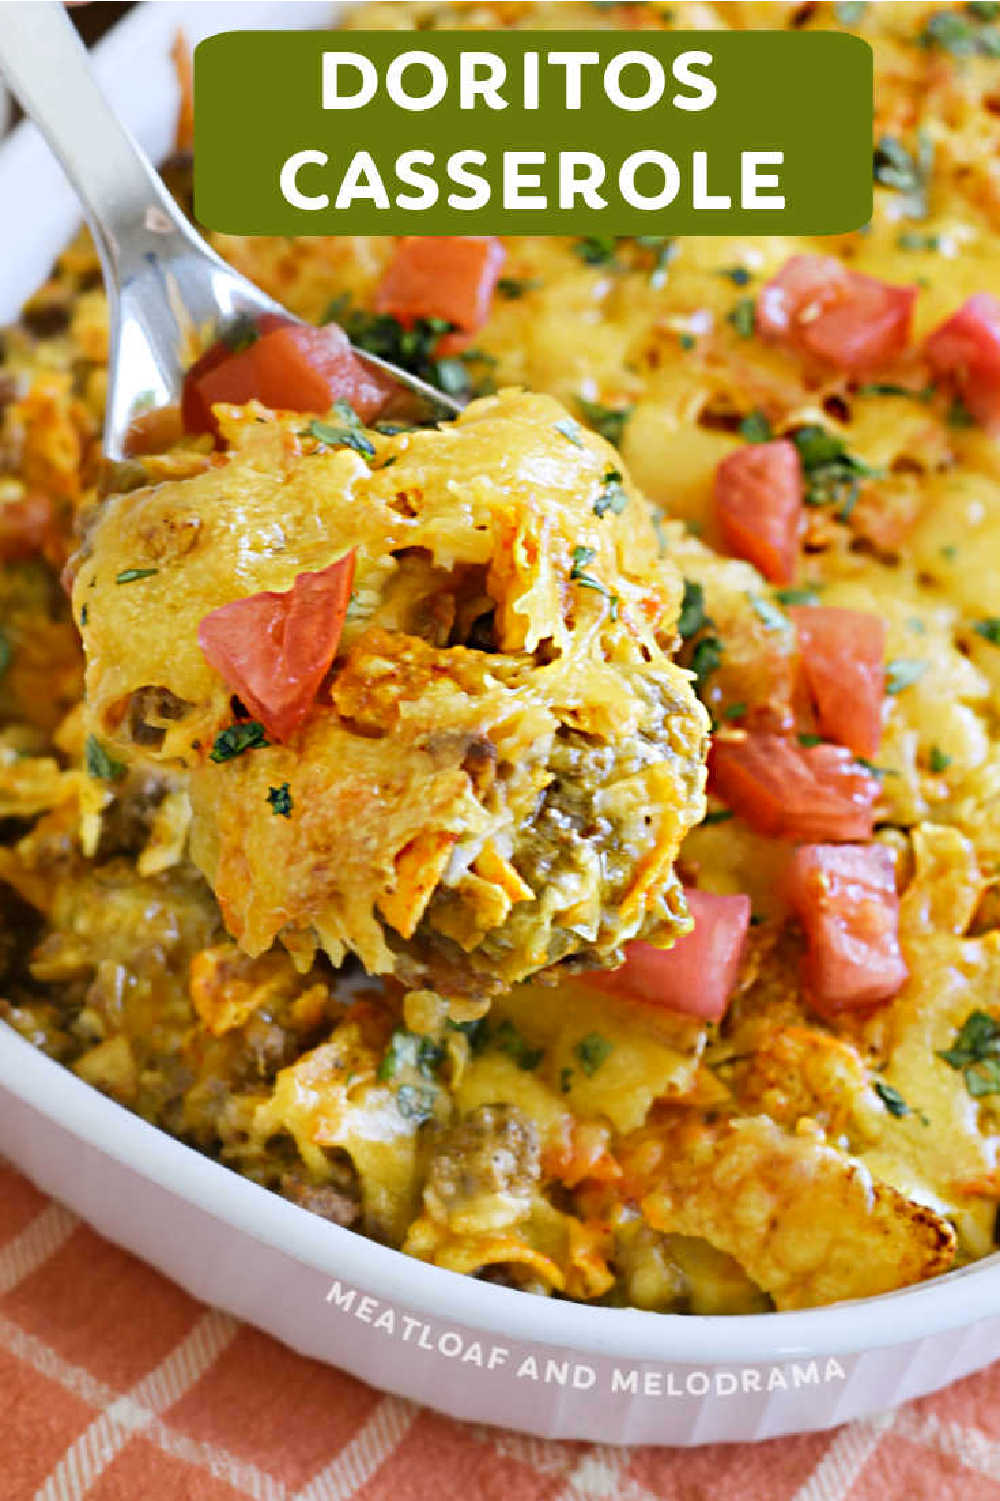 Easy Dorito Casserole recipe made with ground beef, taco seasoning, cheese, salsa, sour cream and Doritos tortilla chips is a family favorite! This delicious dinner is comfort food your whole family will enjoy! via @meamel